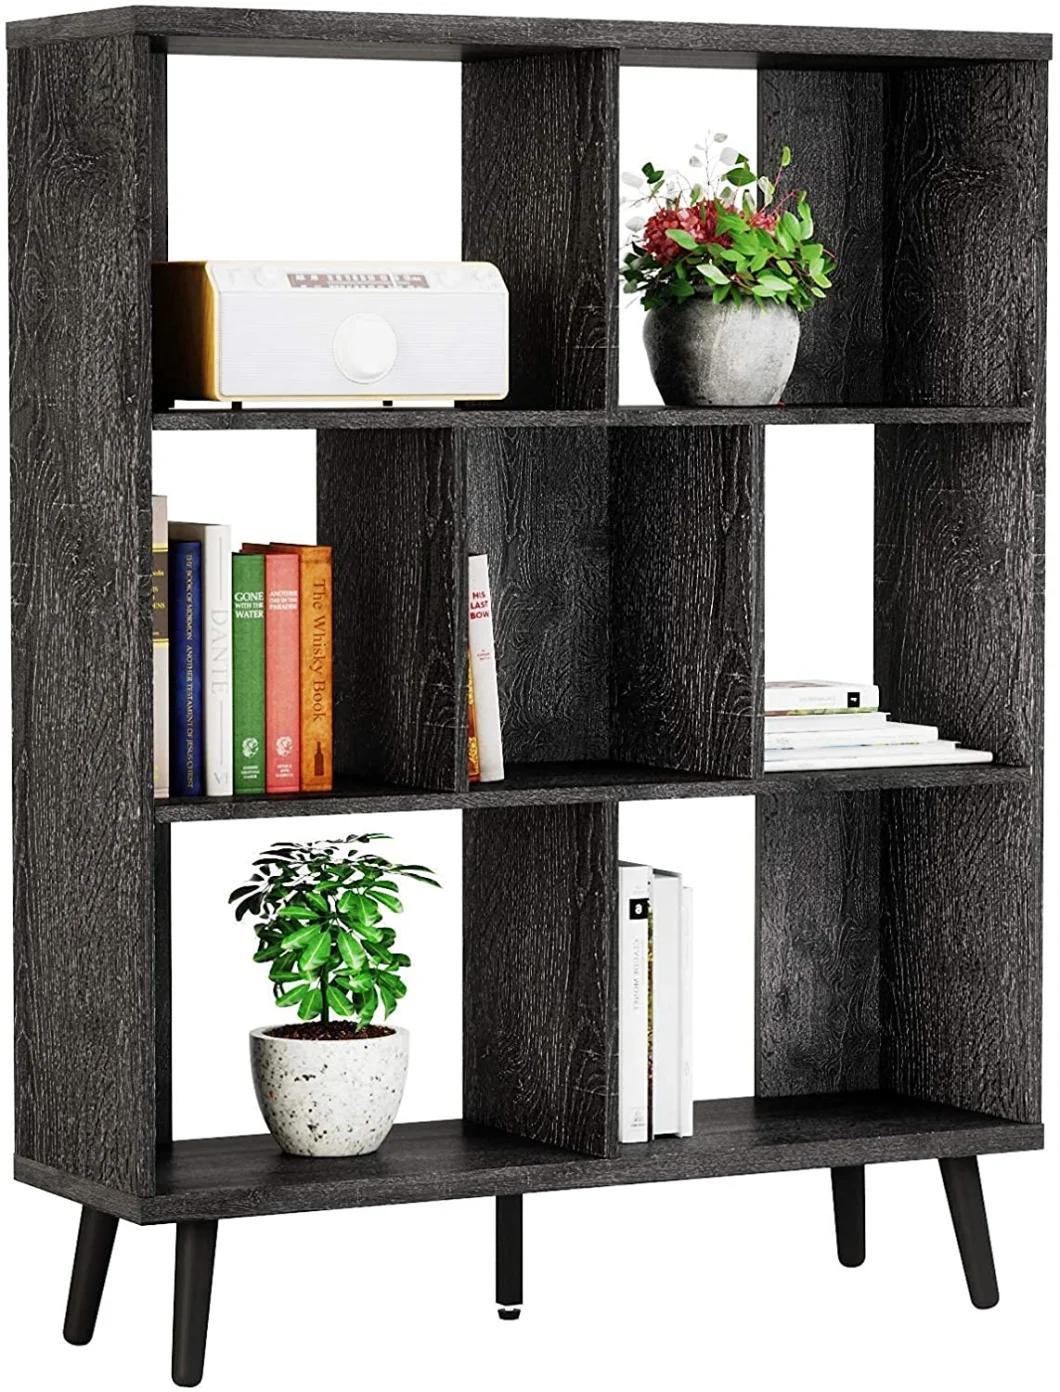 Hot Selling Bookcase Bookshelf Book Storage for Living Room Home Office